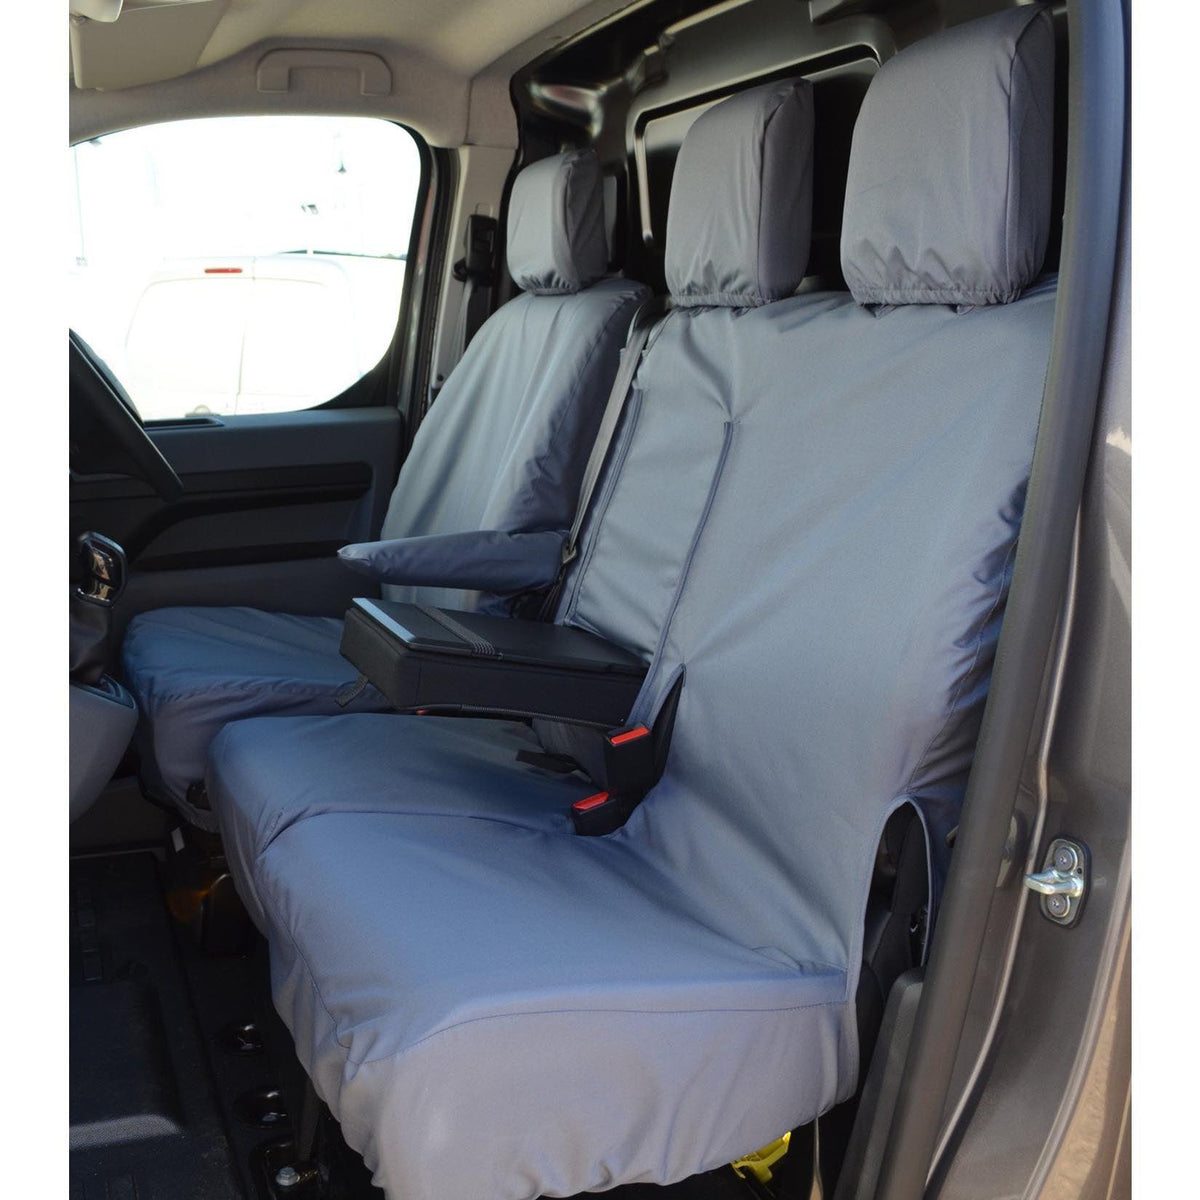 CITROEN DISPATCH VAN 2016 ON DRIVERS AND PASSENGER (FOLDING WITH WORK TRAY) SEAT COVERS – GREY - Storm Xccessories2